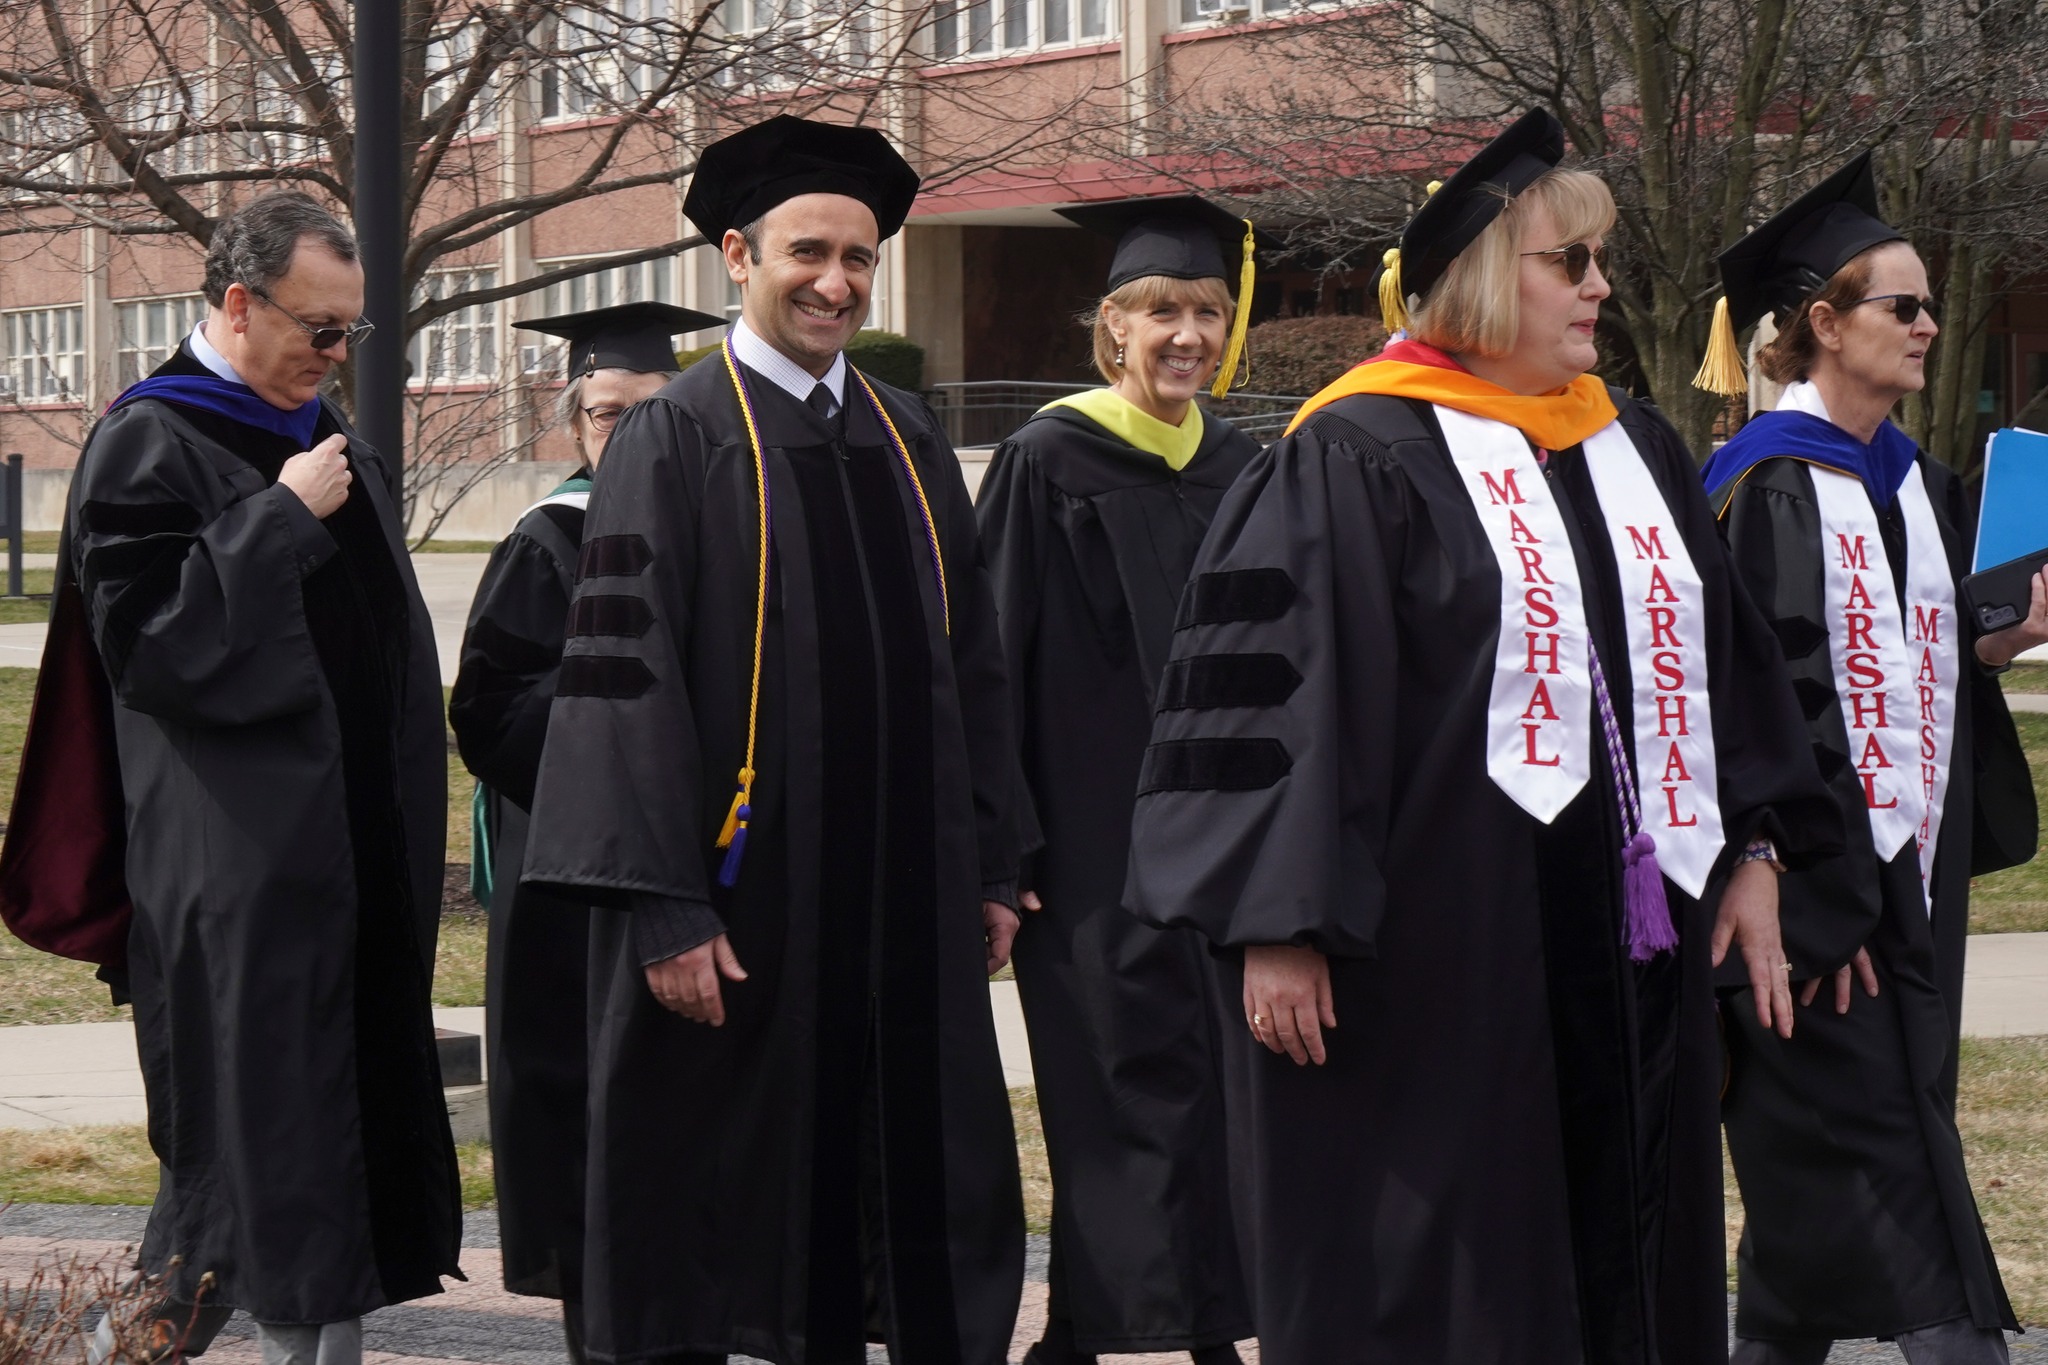 Six people walk outdoors, wearing robes, with two people wearing Marshal ribbons over their shoulders. Buildings, trees are pictured in the background.